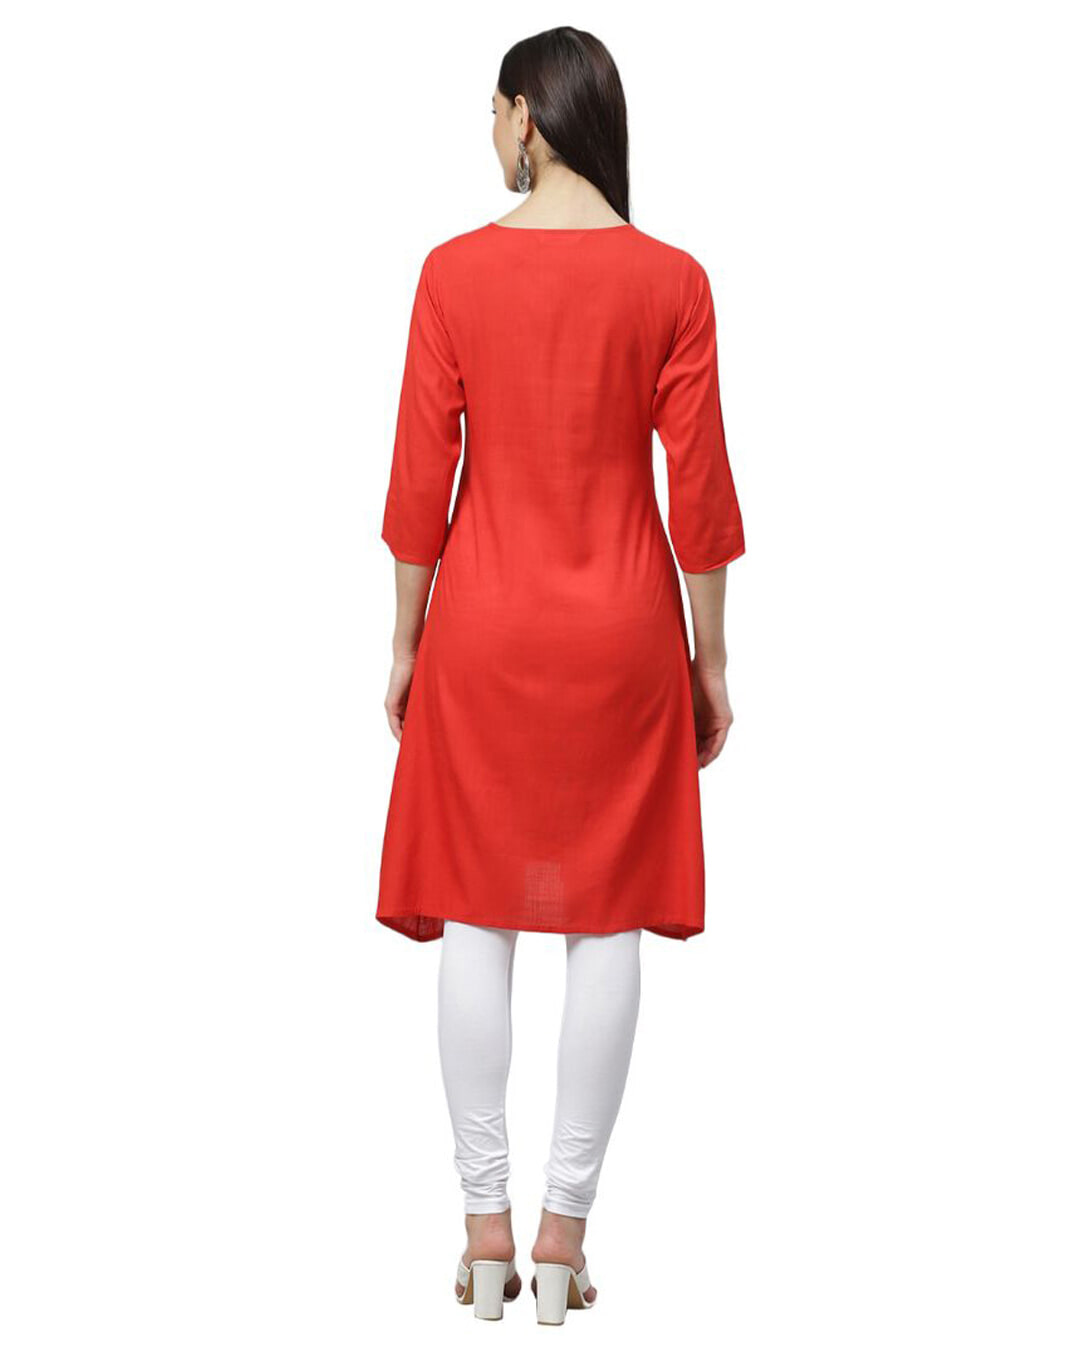 Shop Women's Red Cotton Solid 3/4 Sleeve Round Neck Casual Kurta-Back